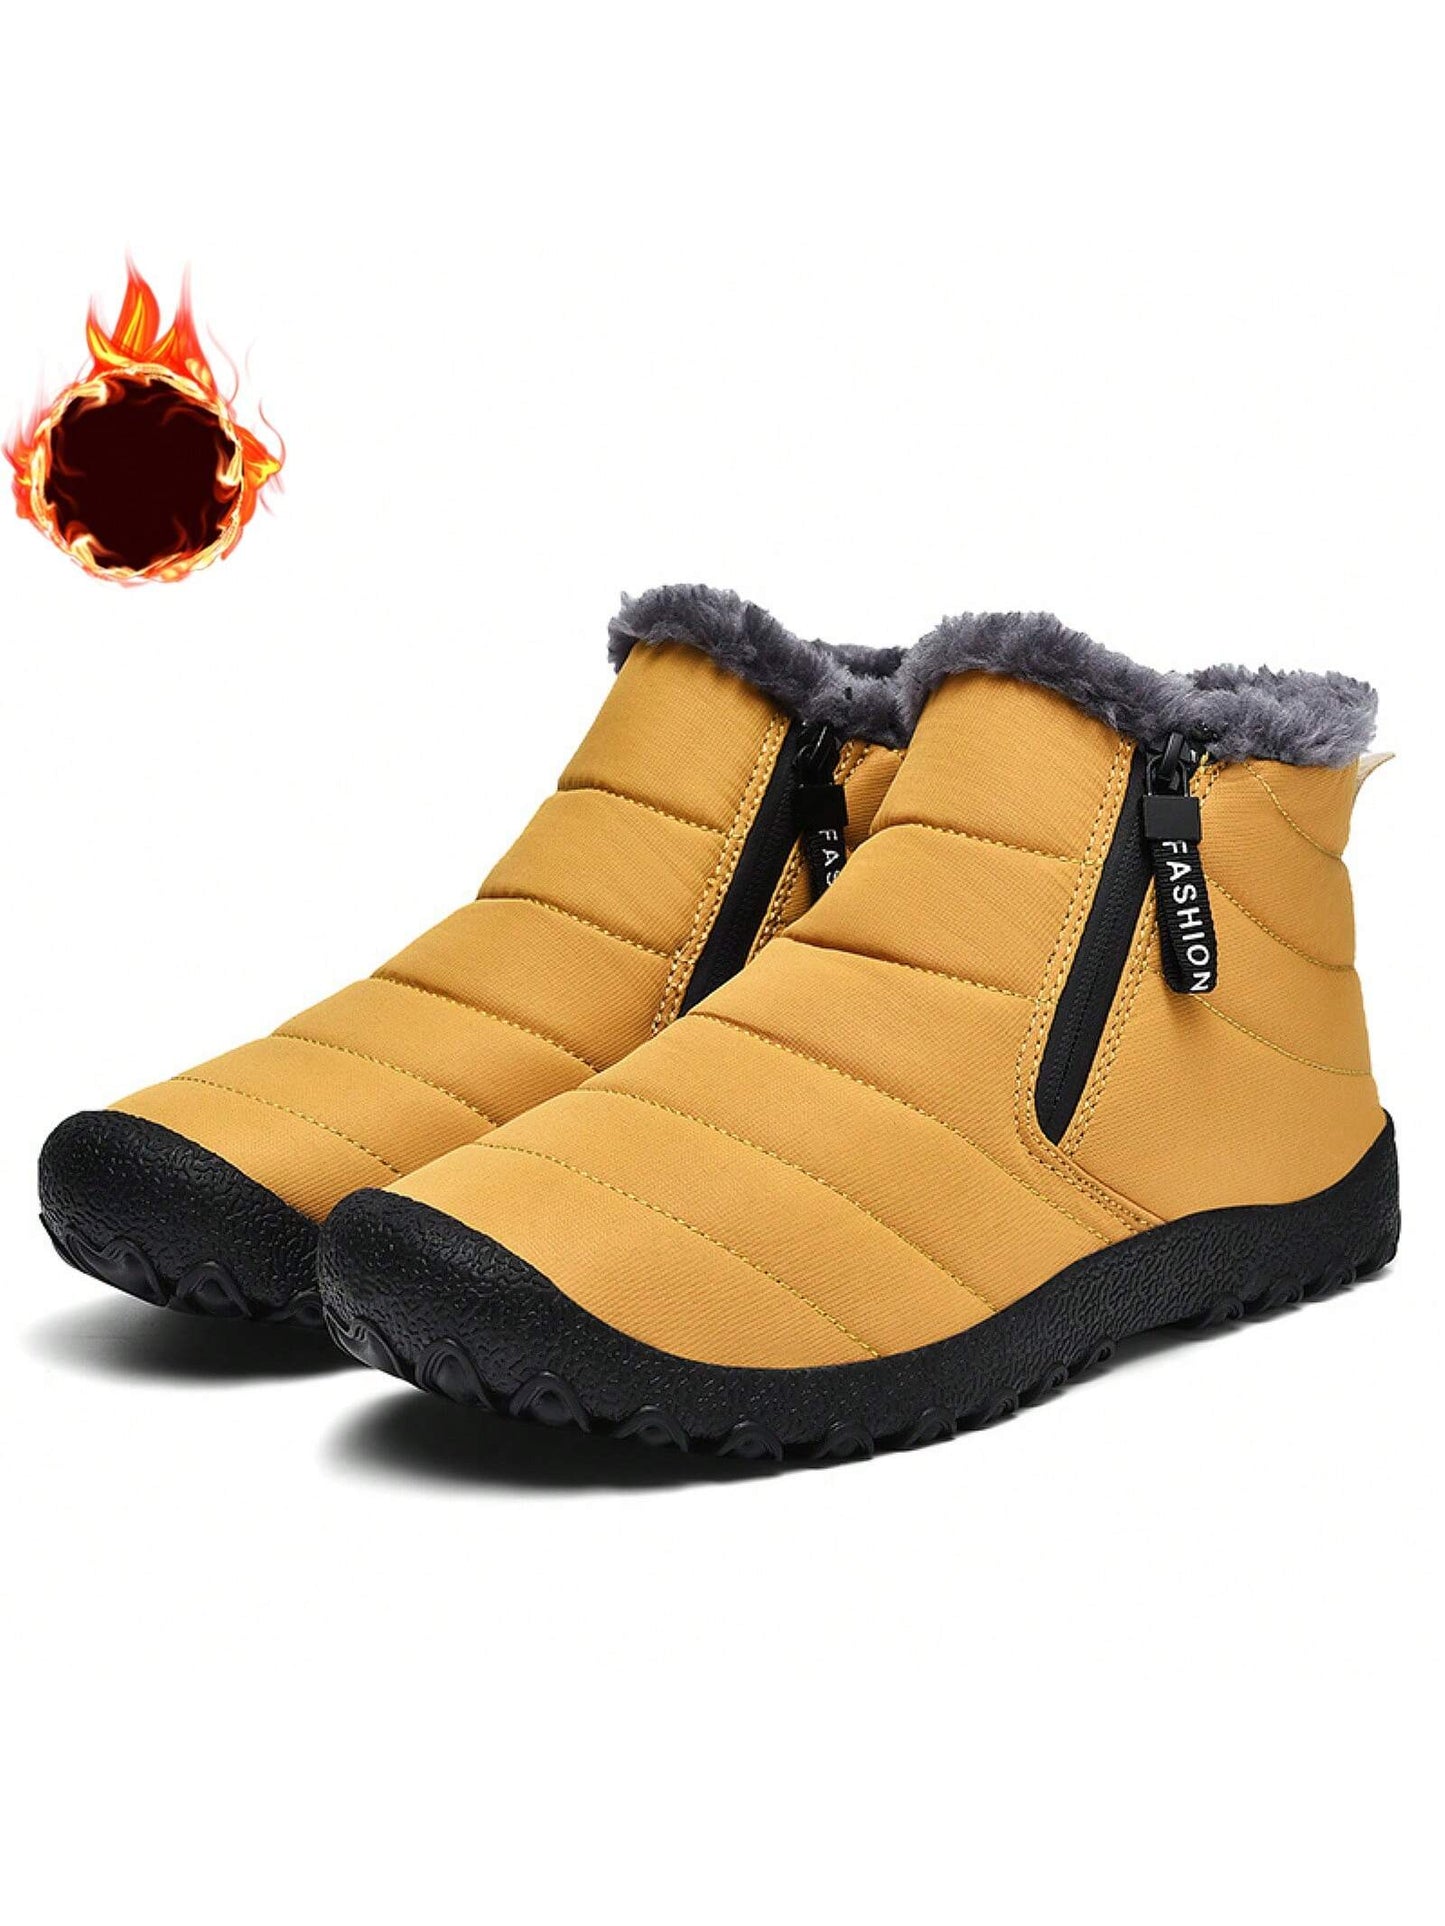 Men's Snow Boots, Waterproof Non Slip Warm Comfy Ankle Boots For Outdoor Hiking Trekking, Winter